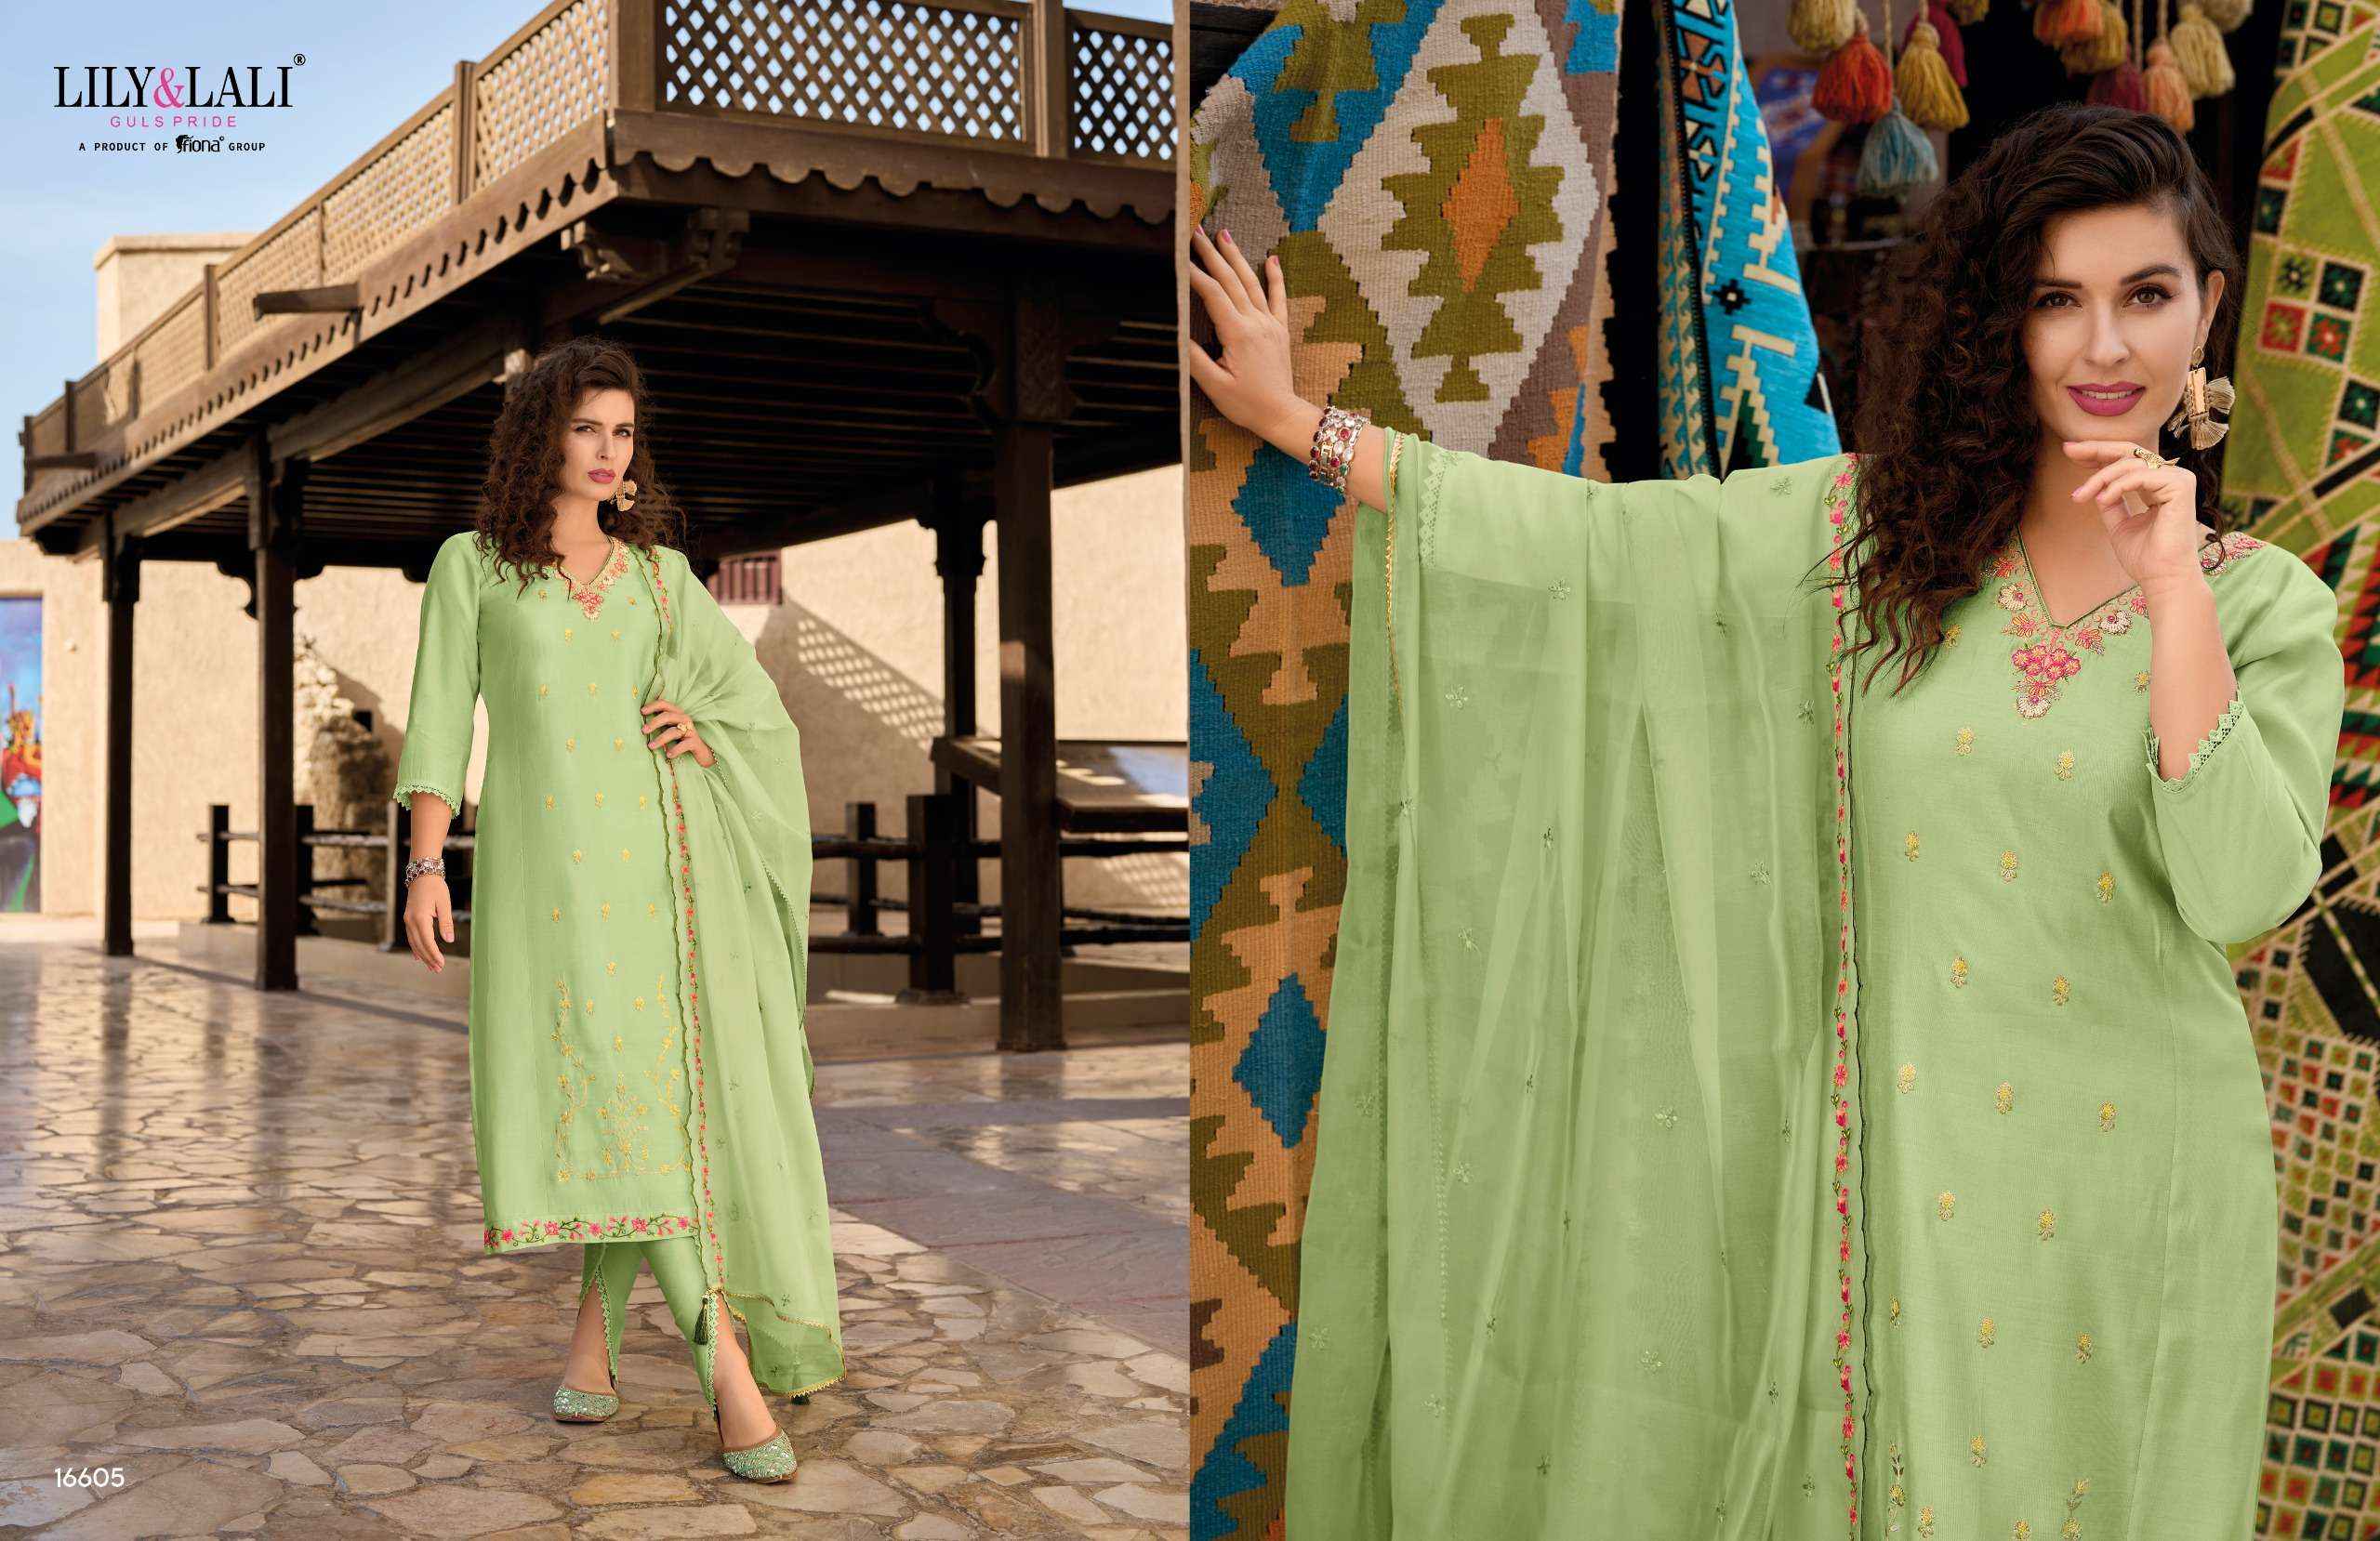 LILY AND LALI MIRAAN FANCY DESIGNER SILK SUITS ( 6 PCS CATALOG )